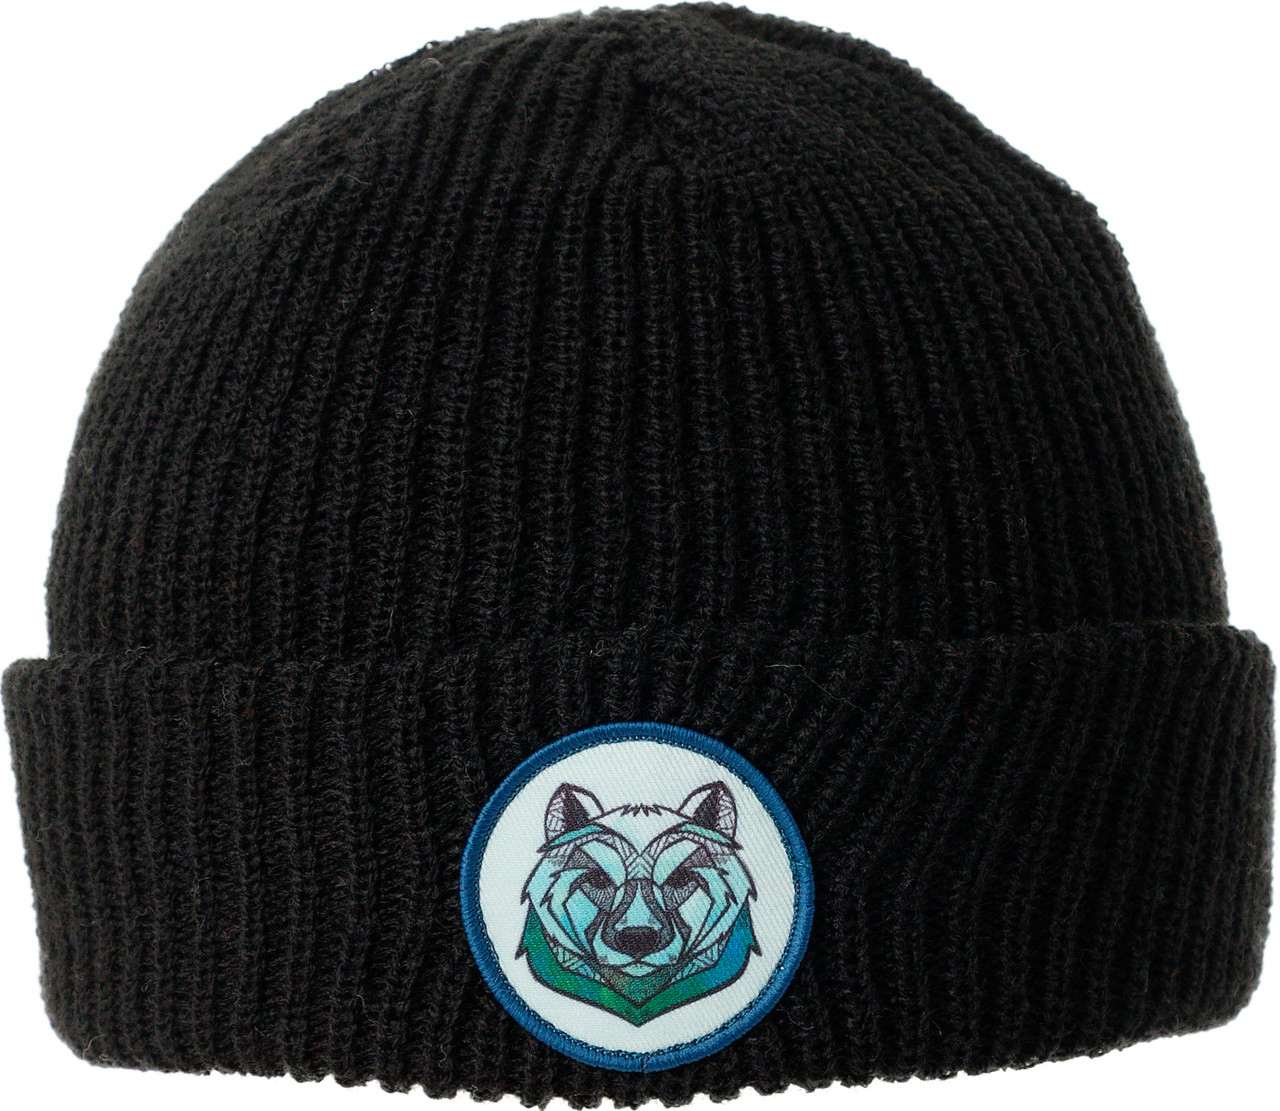 Tuque Cub Ours